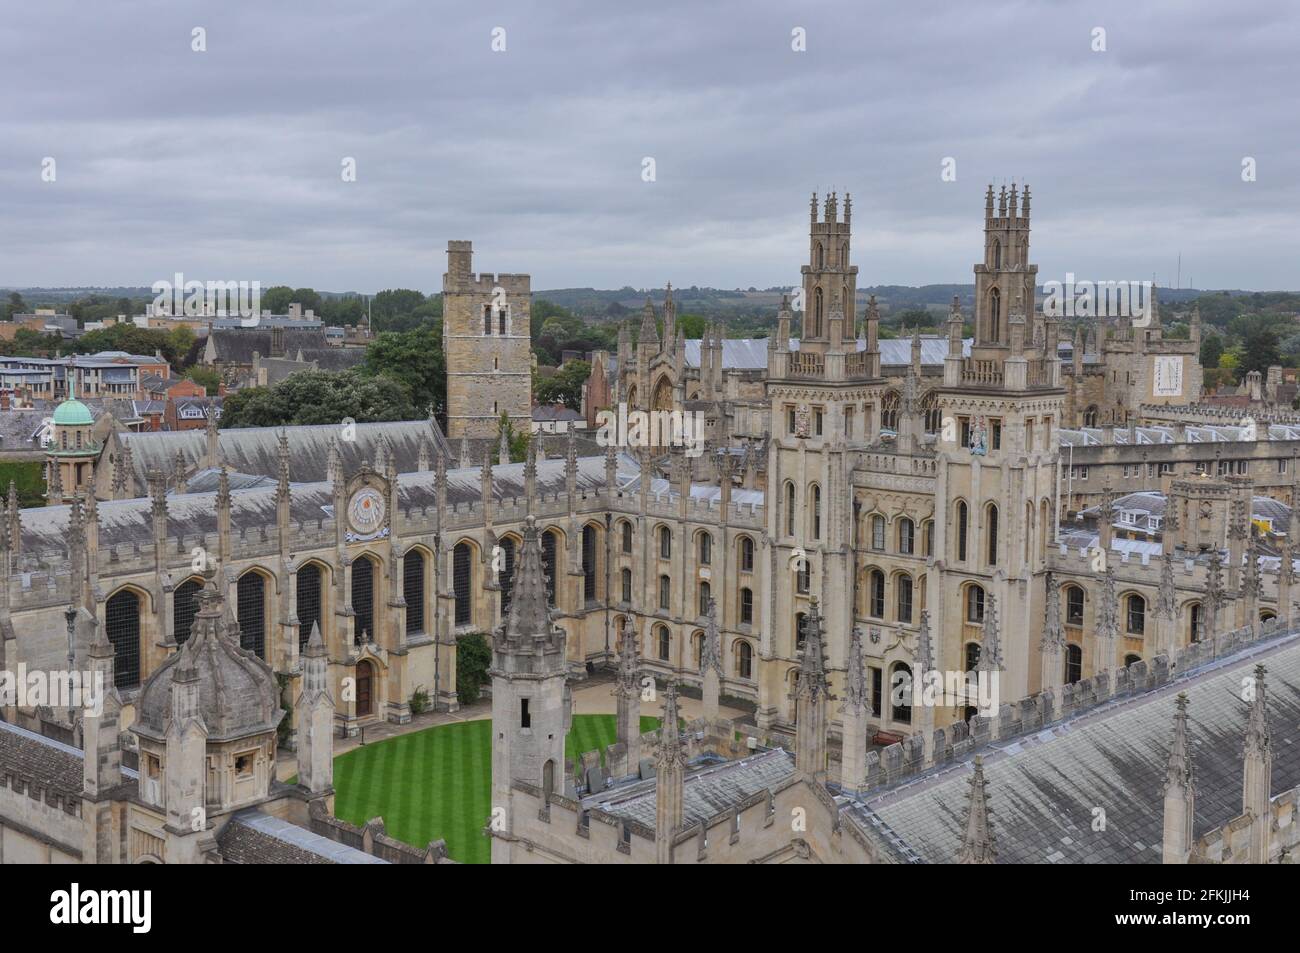 Rooftop view on historical university buildings towards All Souls College, Oxford, United Kingdom. Overcast sky. Stock Photo